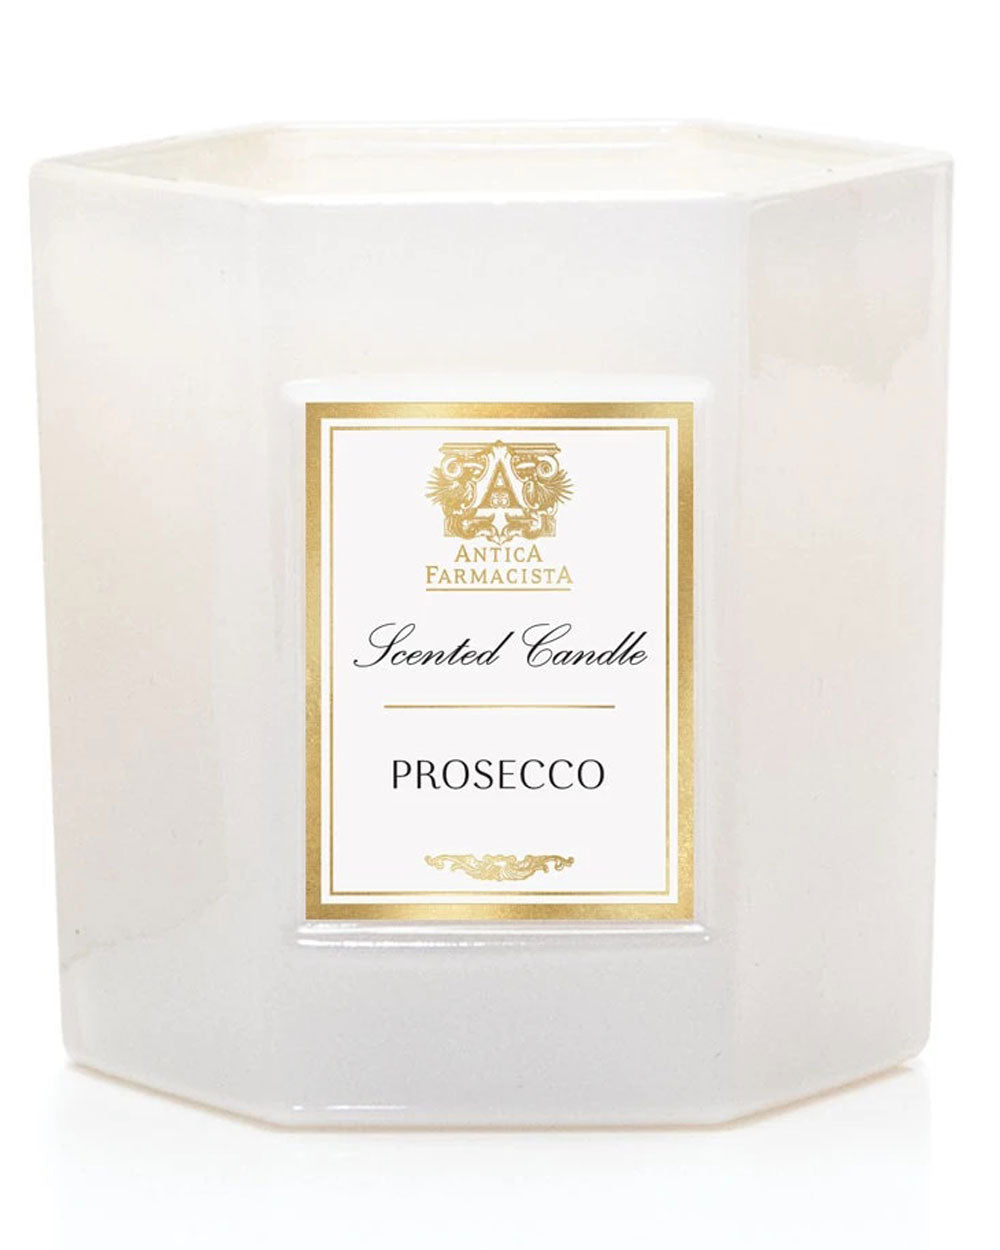 Scented Candle in Prosecco